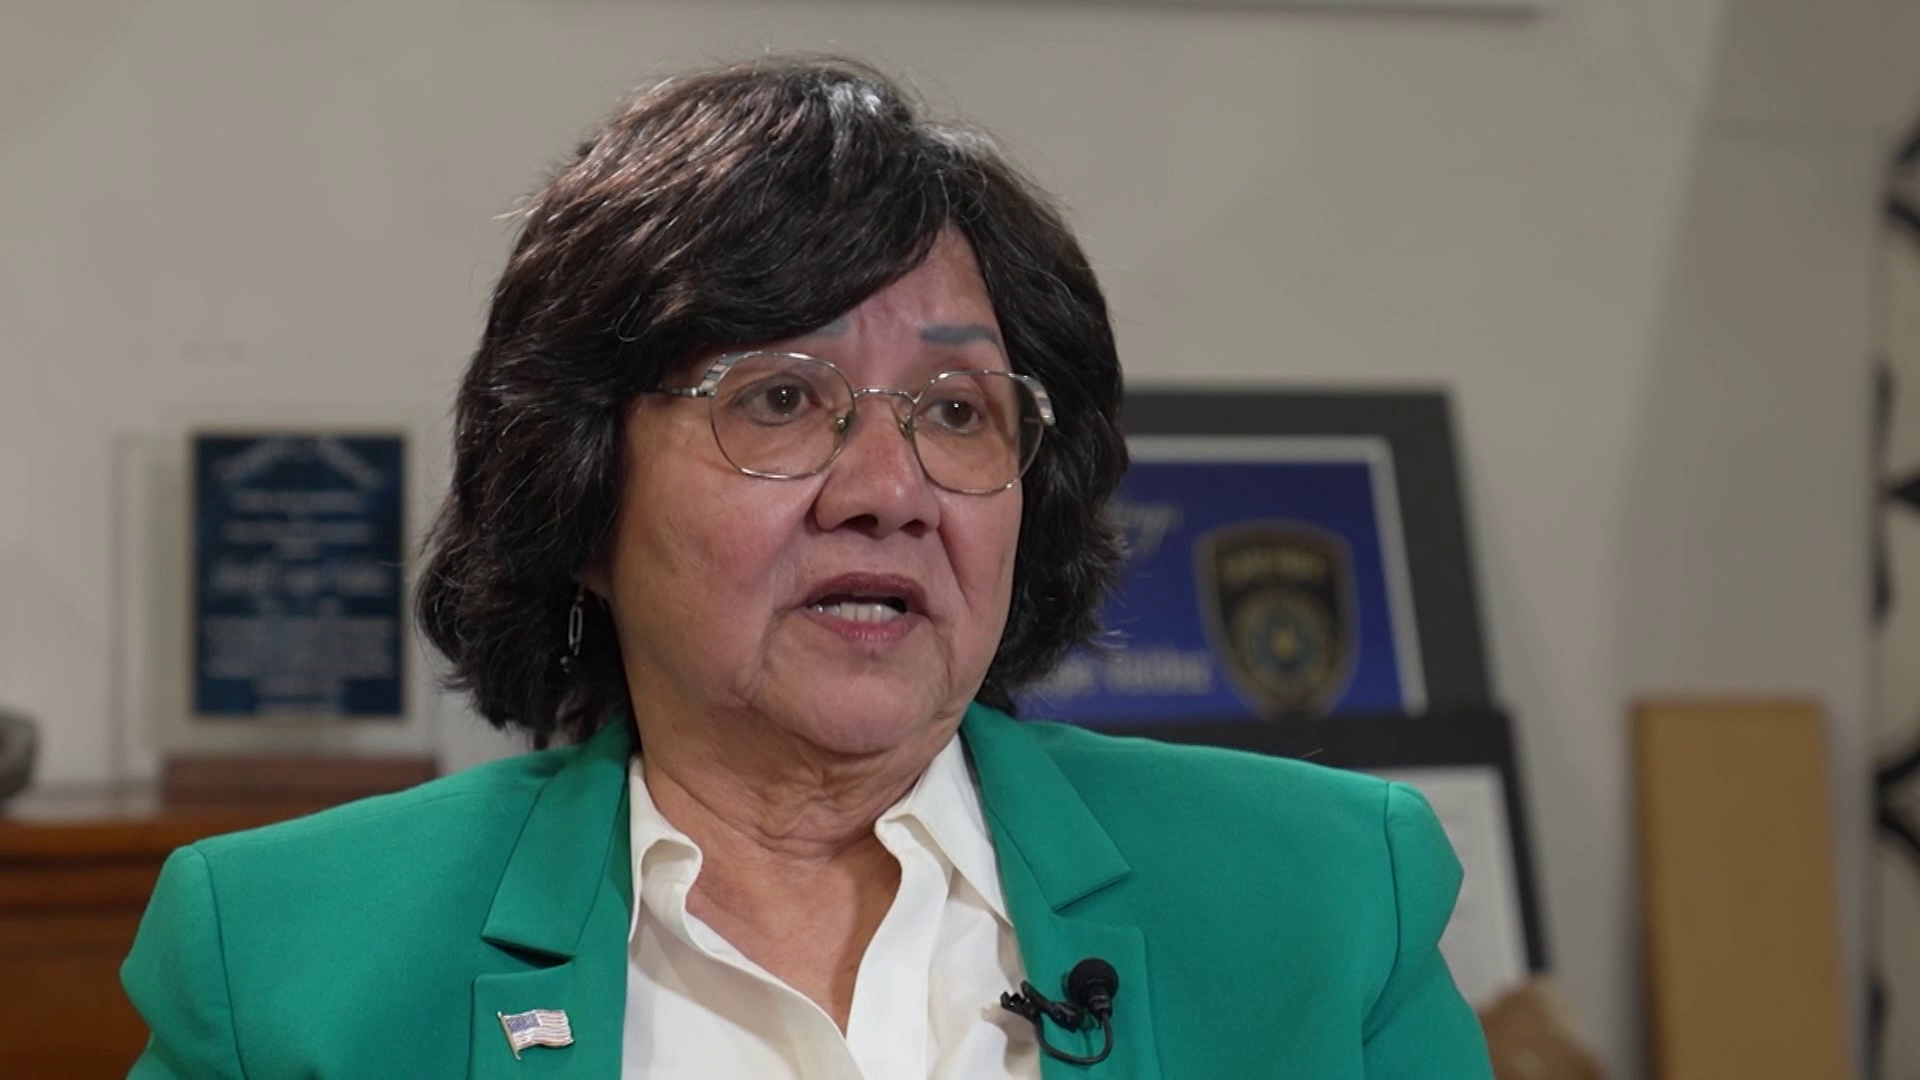 Dallas County voters May 28 will decide the next sheriff during the runoff election between incumbent sheriff Marian Brown and former sheriff Lupe Valdez.